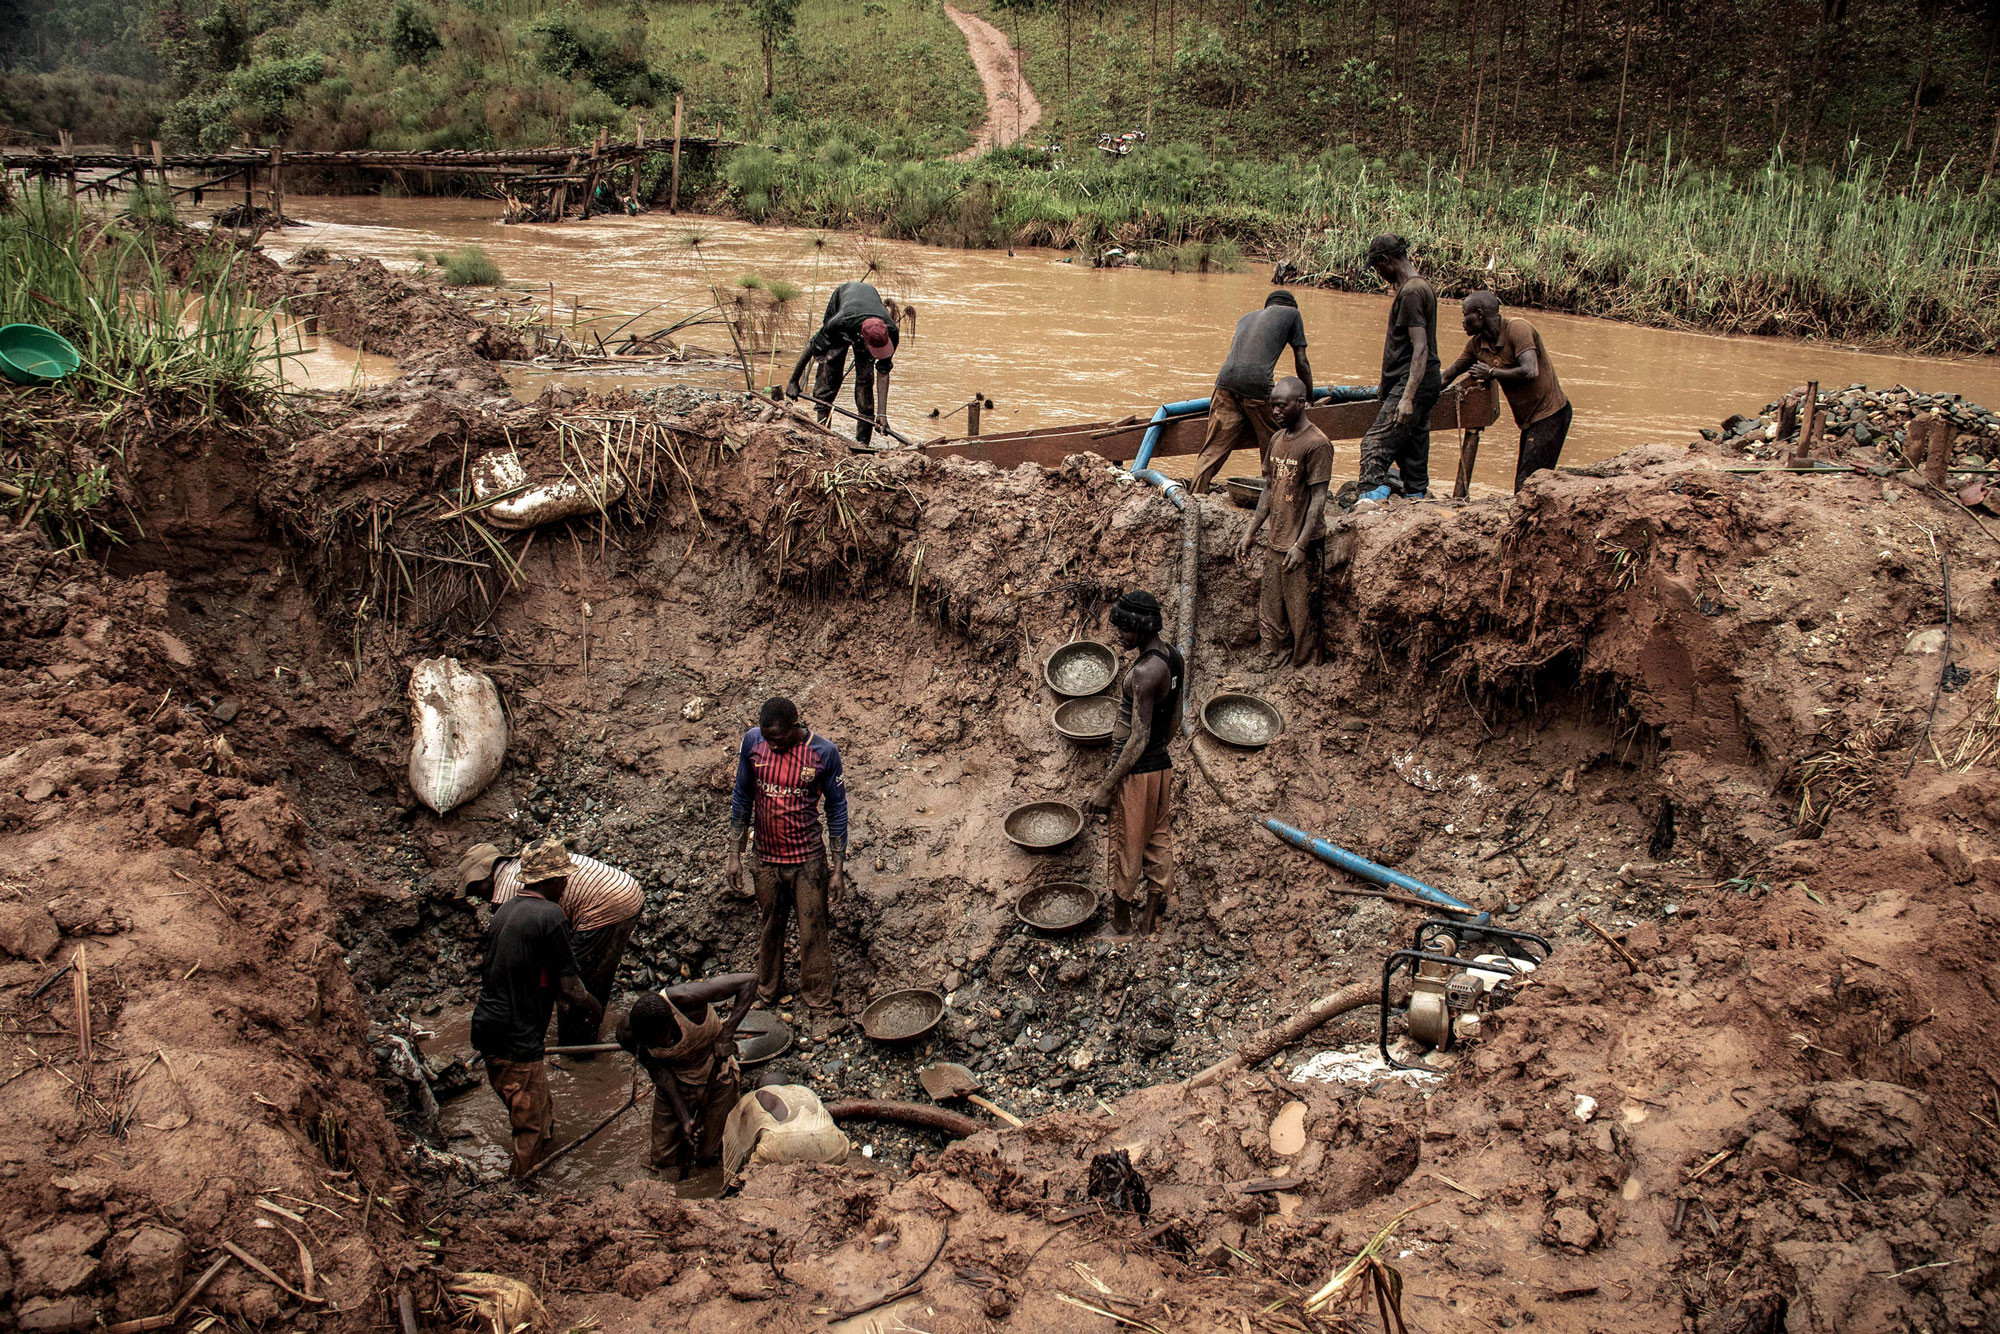 Bambissa, DRC, February 2020. Artisanal miners extract gold from the alluvial sediments of the Nizi River near the village of Bambissa in Congo’s northeastern Ituri Province in February. Much of the bloodshed in Ituri has its roots in competition over gold mines, according to Human Rights Watch. Local mines have long been a source of cash for ex-rebels, politicians, and Congolese military officials who are involved in smuggling gold into neighboring Uganda and South Sudan. Gold is mined by artisanal mining cooperatives, typically using rudimentary tools and techniques. Most cooperatives and mining companies in the province do not report production figures, and minerals are illegally marketed, causing “massive fraud” of huge quantities, according to Reuters. Measures to curb the coronavirus worldwide have disrupted the supply chains artisanal gold miners depend on and dried up funding, causing local gold prices to slump to discounts of as much as 40% to the world price, the news agency reported. In one area of Ituri, 79 out of 85 gold trading houses have shut down because they have no one to sell to, research by Canadian natural resources NGO IMPACT found. © Dieudonne Dirole for Fondation Carmignac